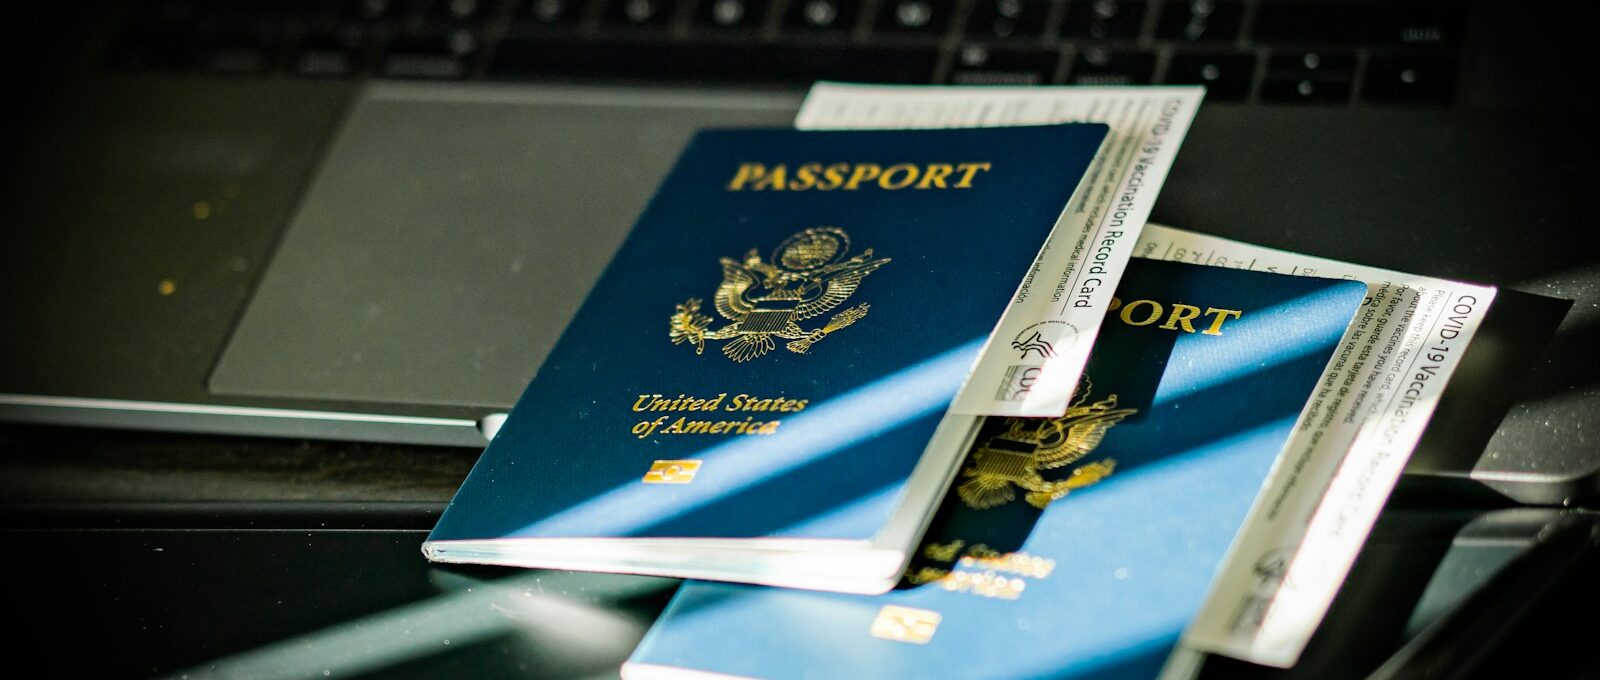 a passport sitting on top of a computer keyboard